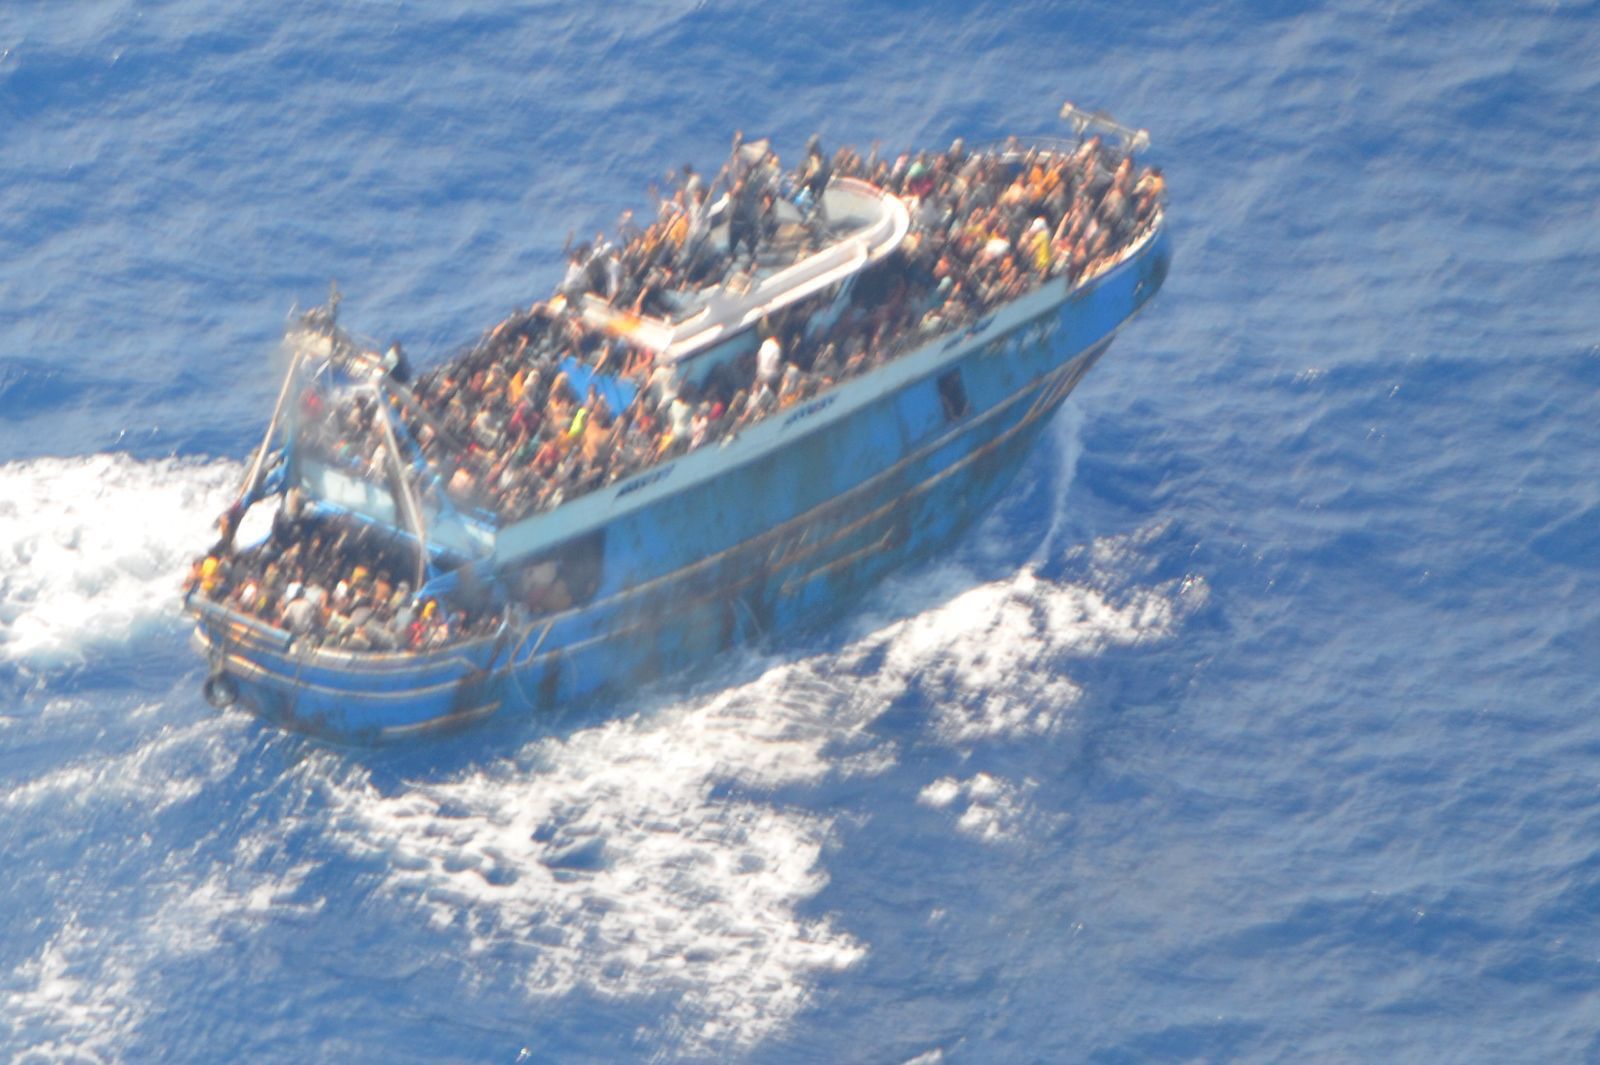 An overcrowded fishing boat carrying migrants.